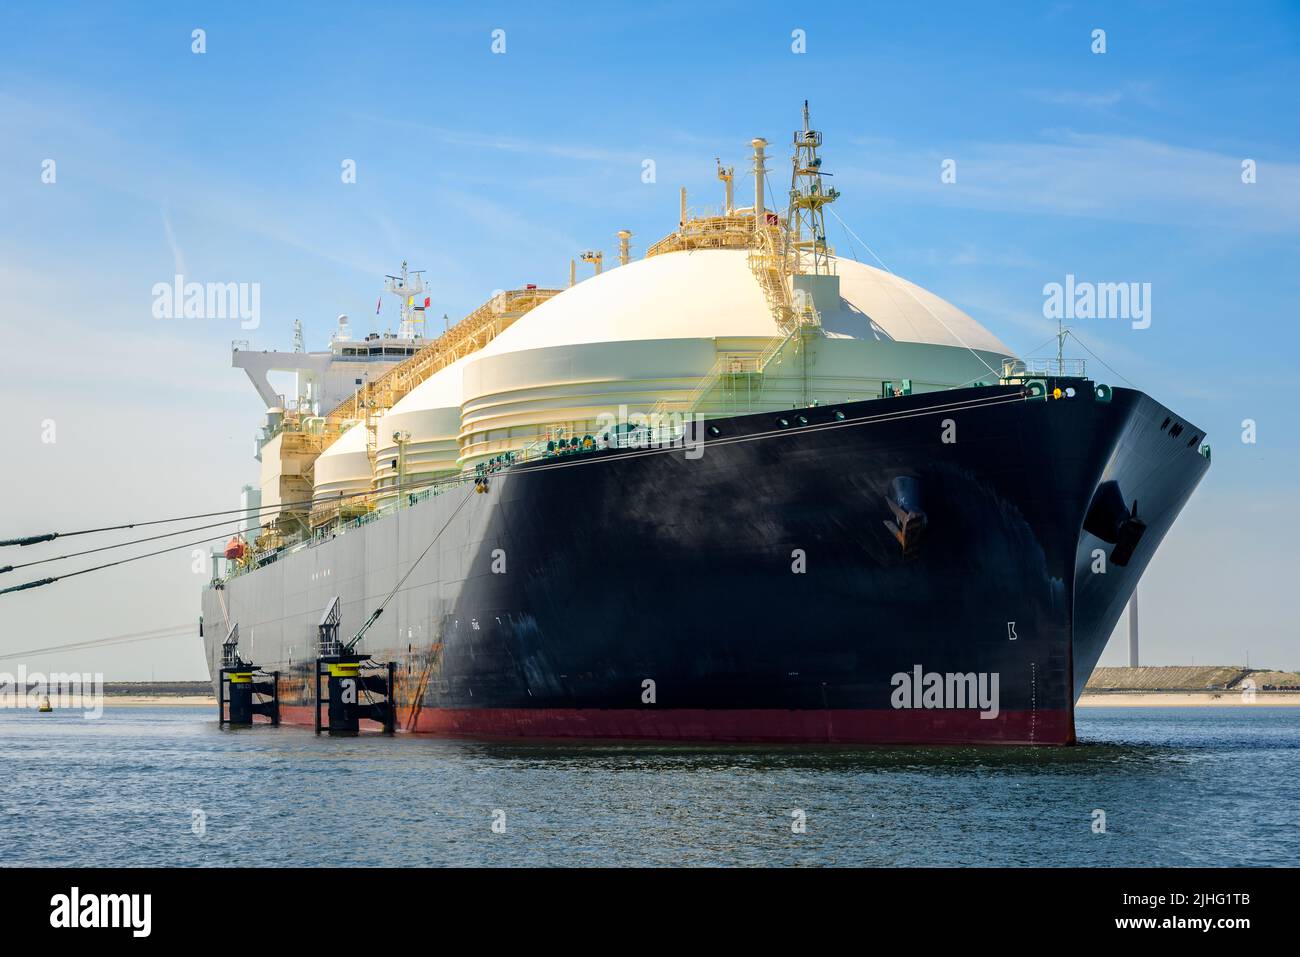 Low angle view of a large LNG tanker ship in a harbour on a clear summer day Stock Photo